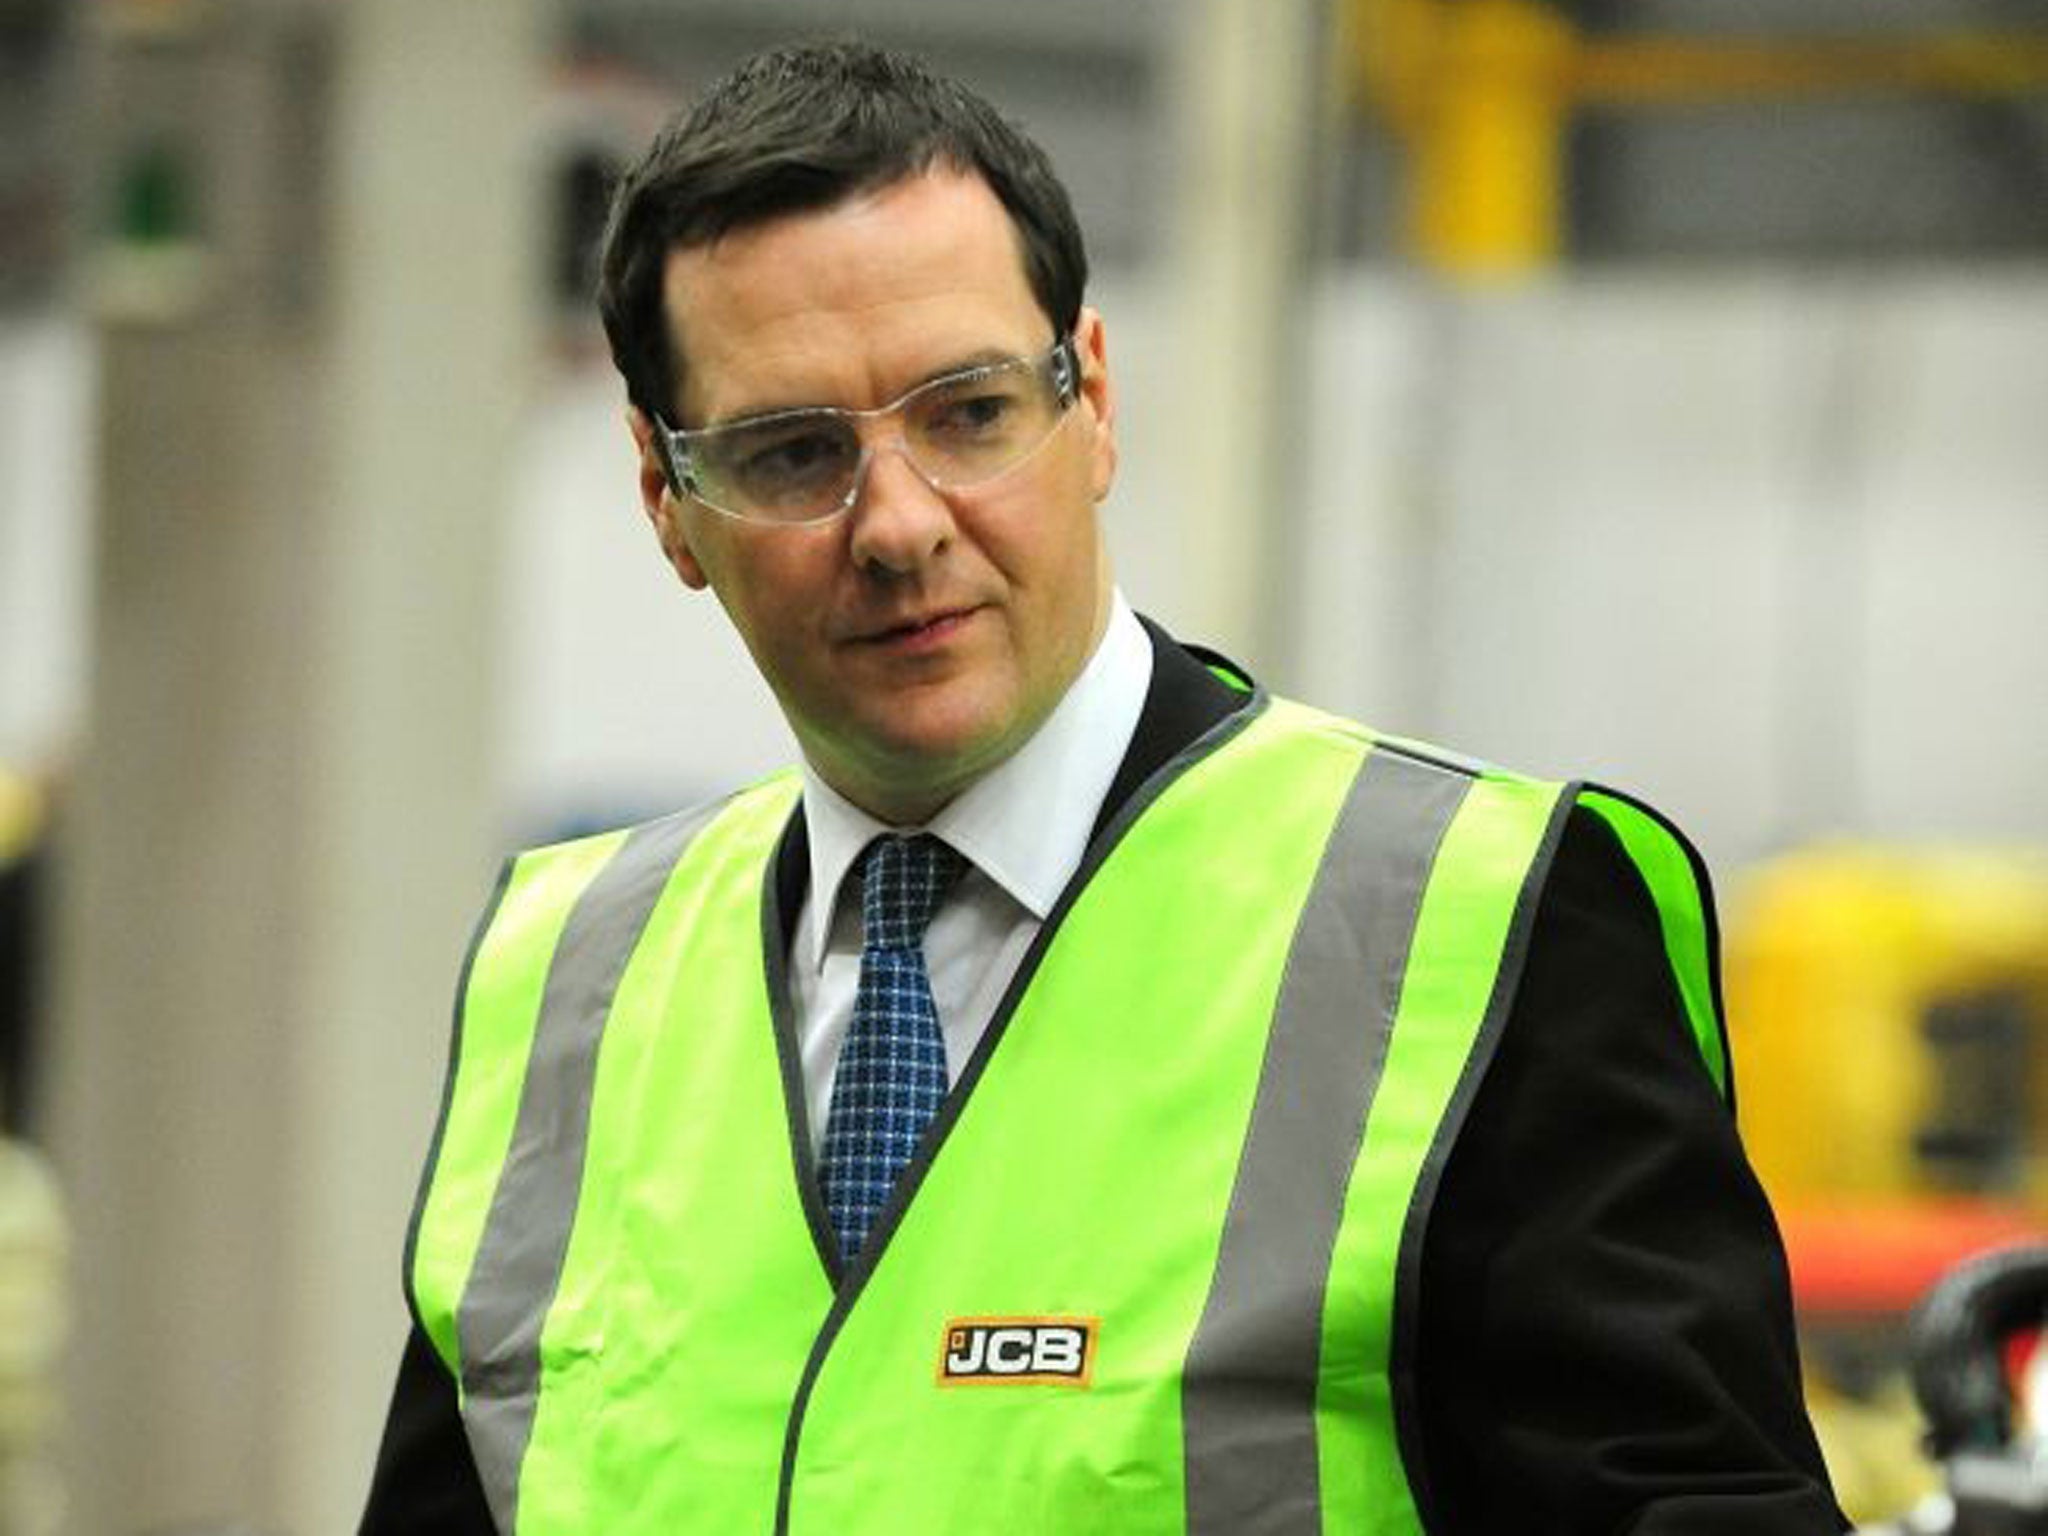 George Osborne has suddenly realised that the north exists, according to Jane Merrick